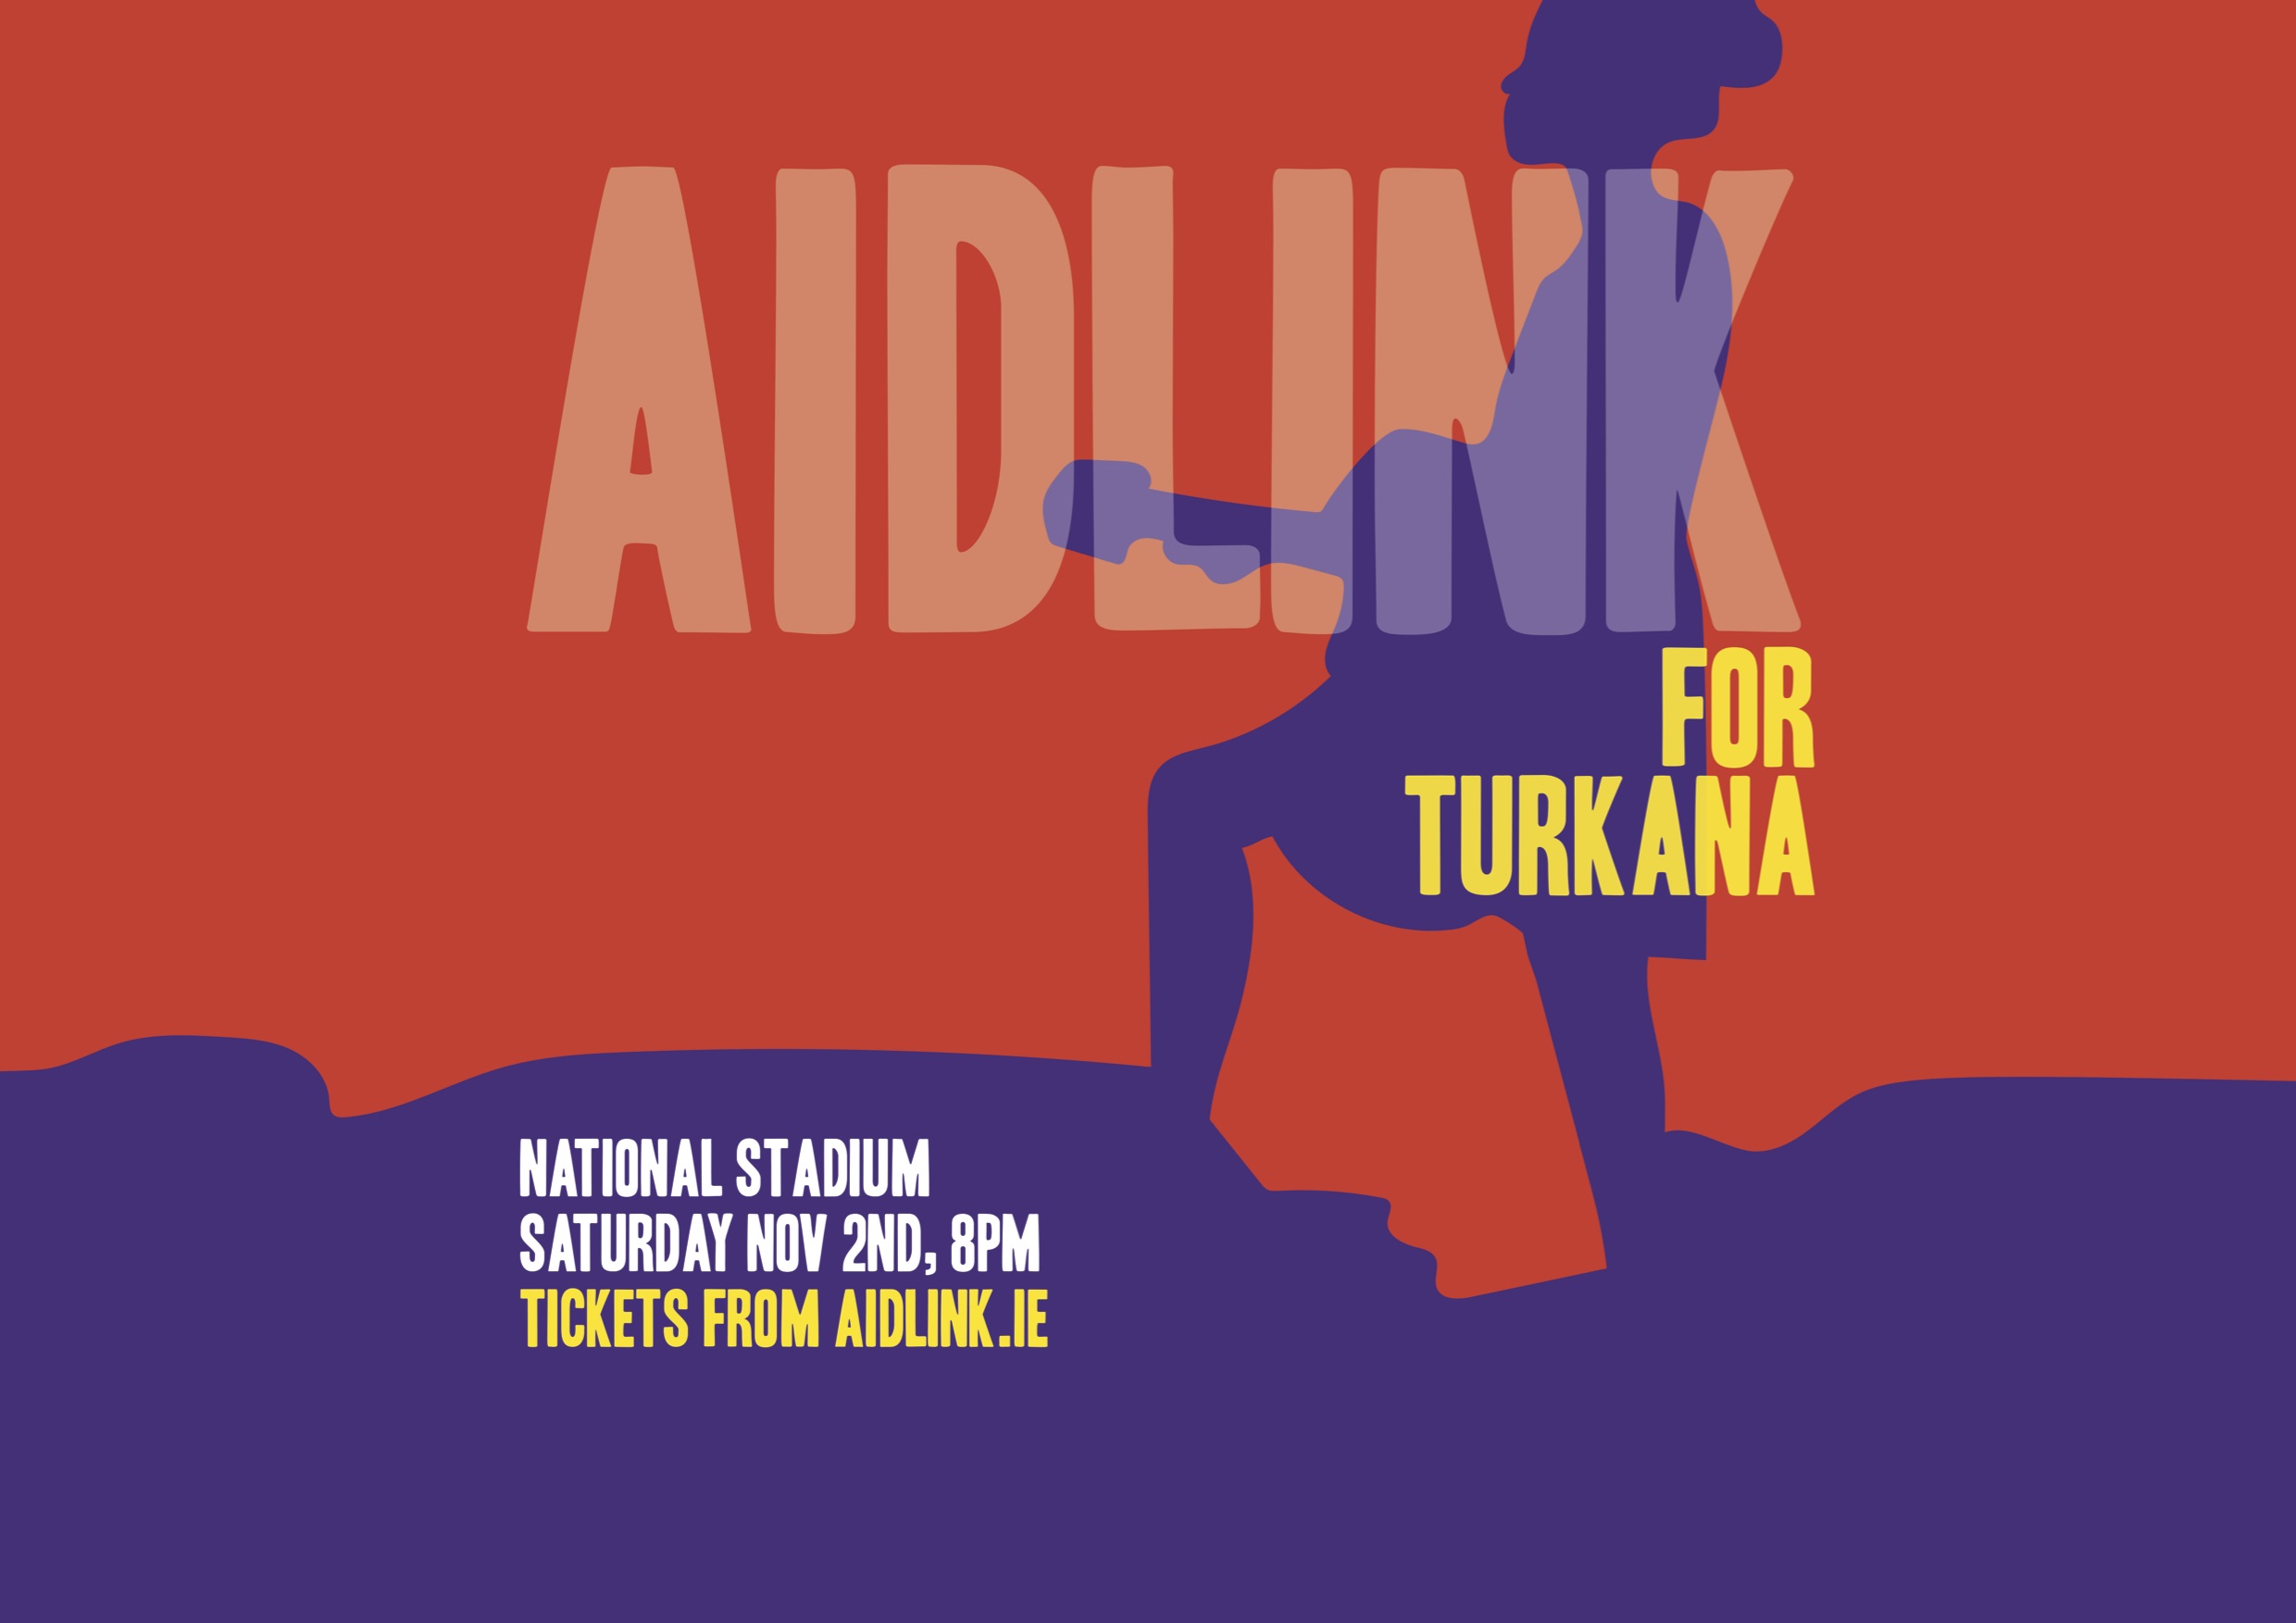 Aidlink for Turkana - The Journal of Music